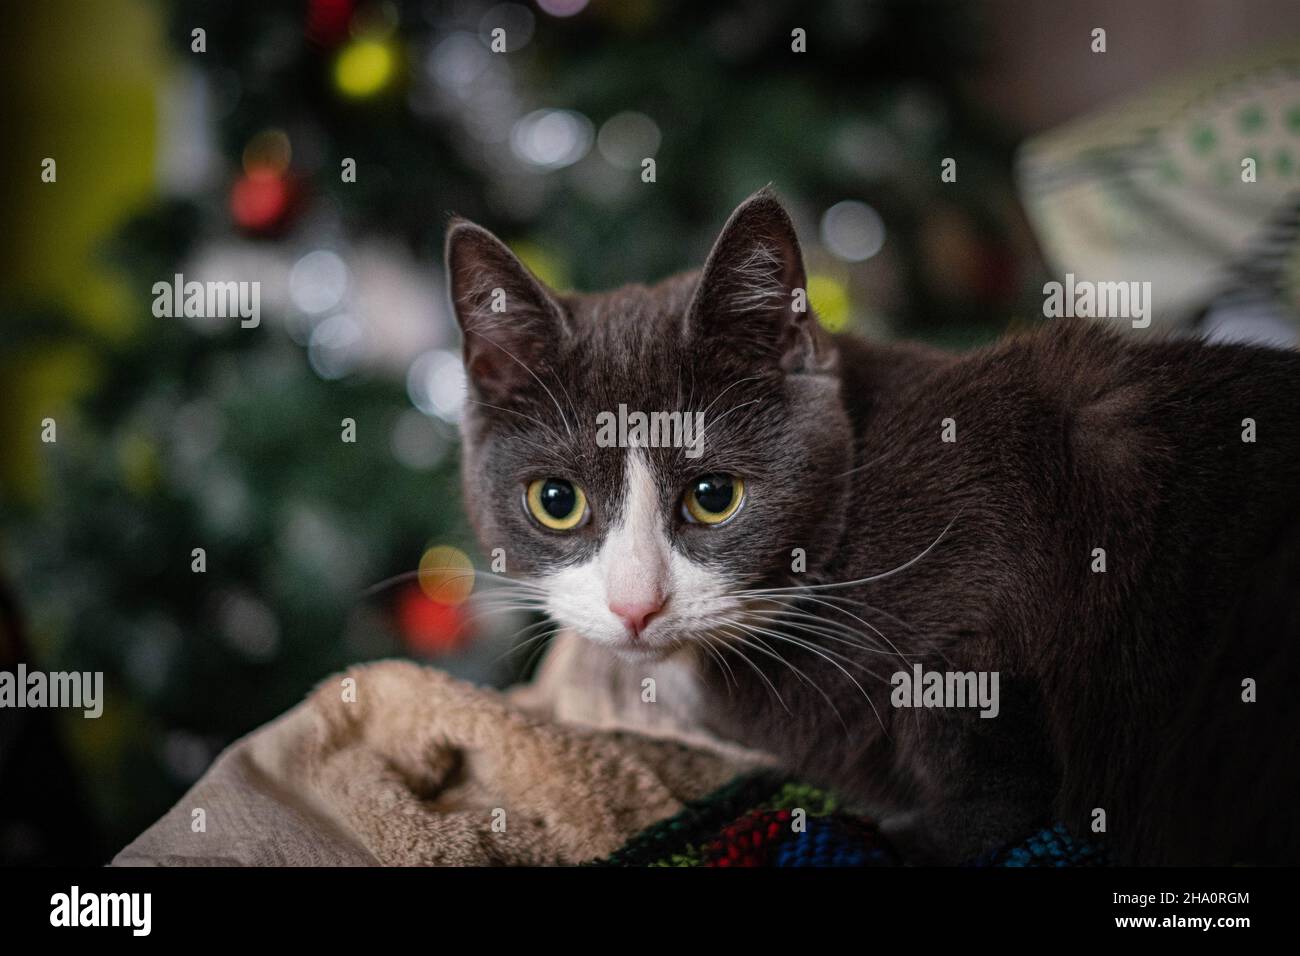 Cat with bright green eyes Stock Photo